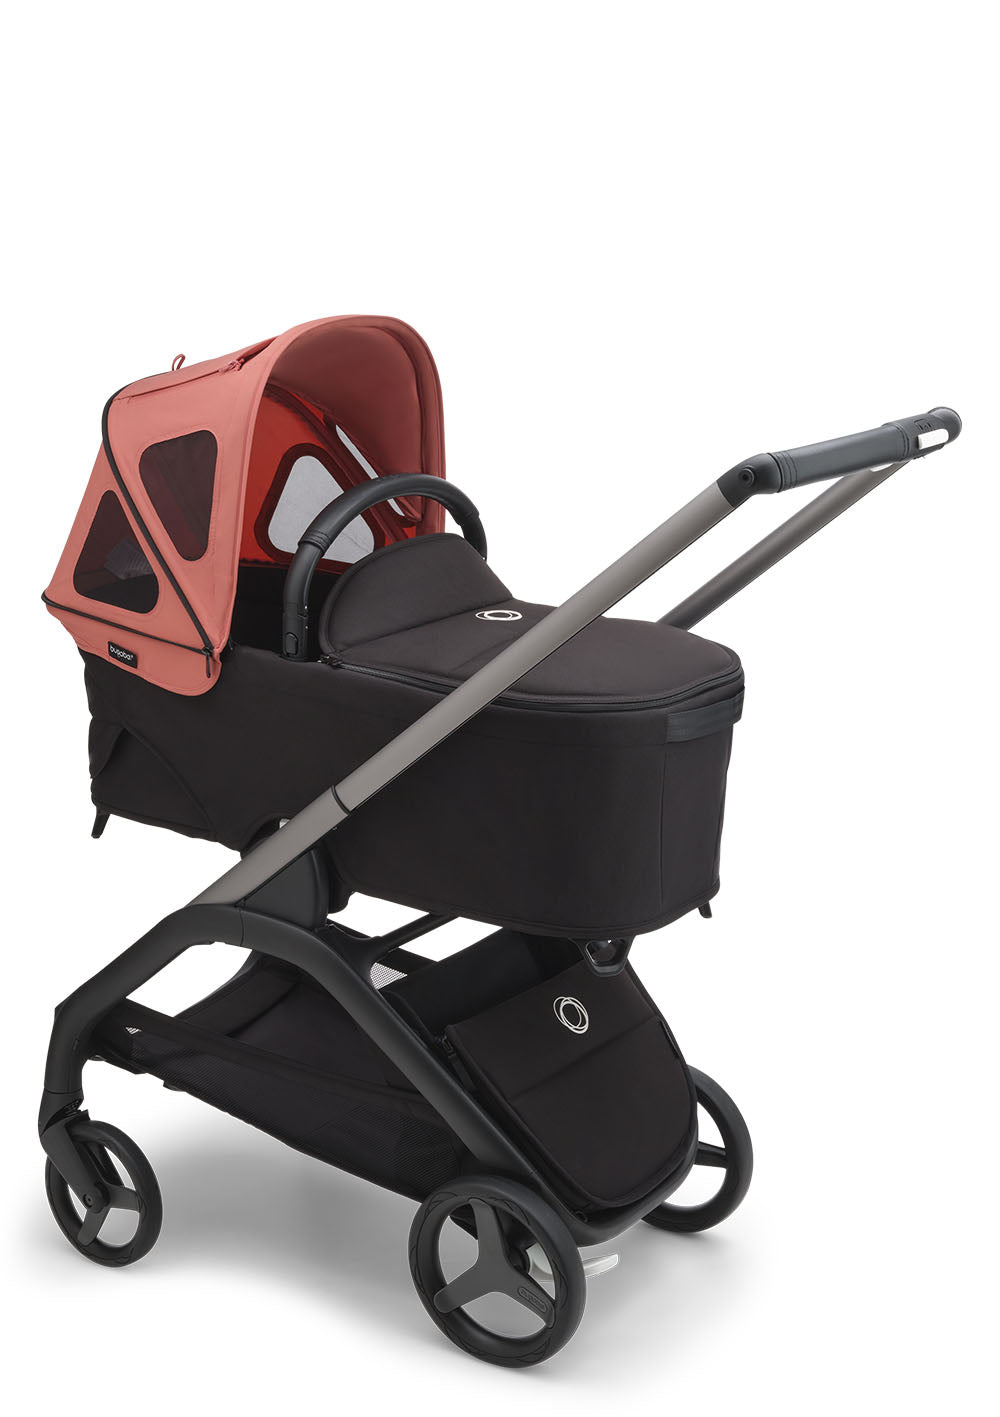 Bugaboo Dragonfly 'Breezy' Sonnendach Morgenrot